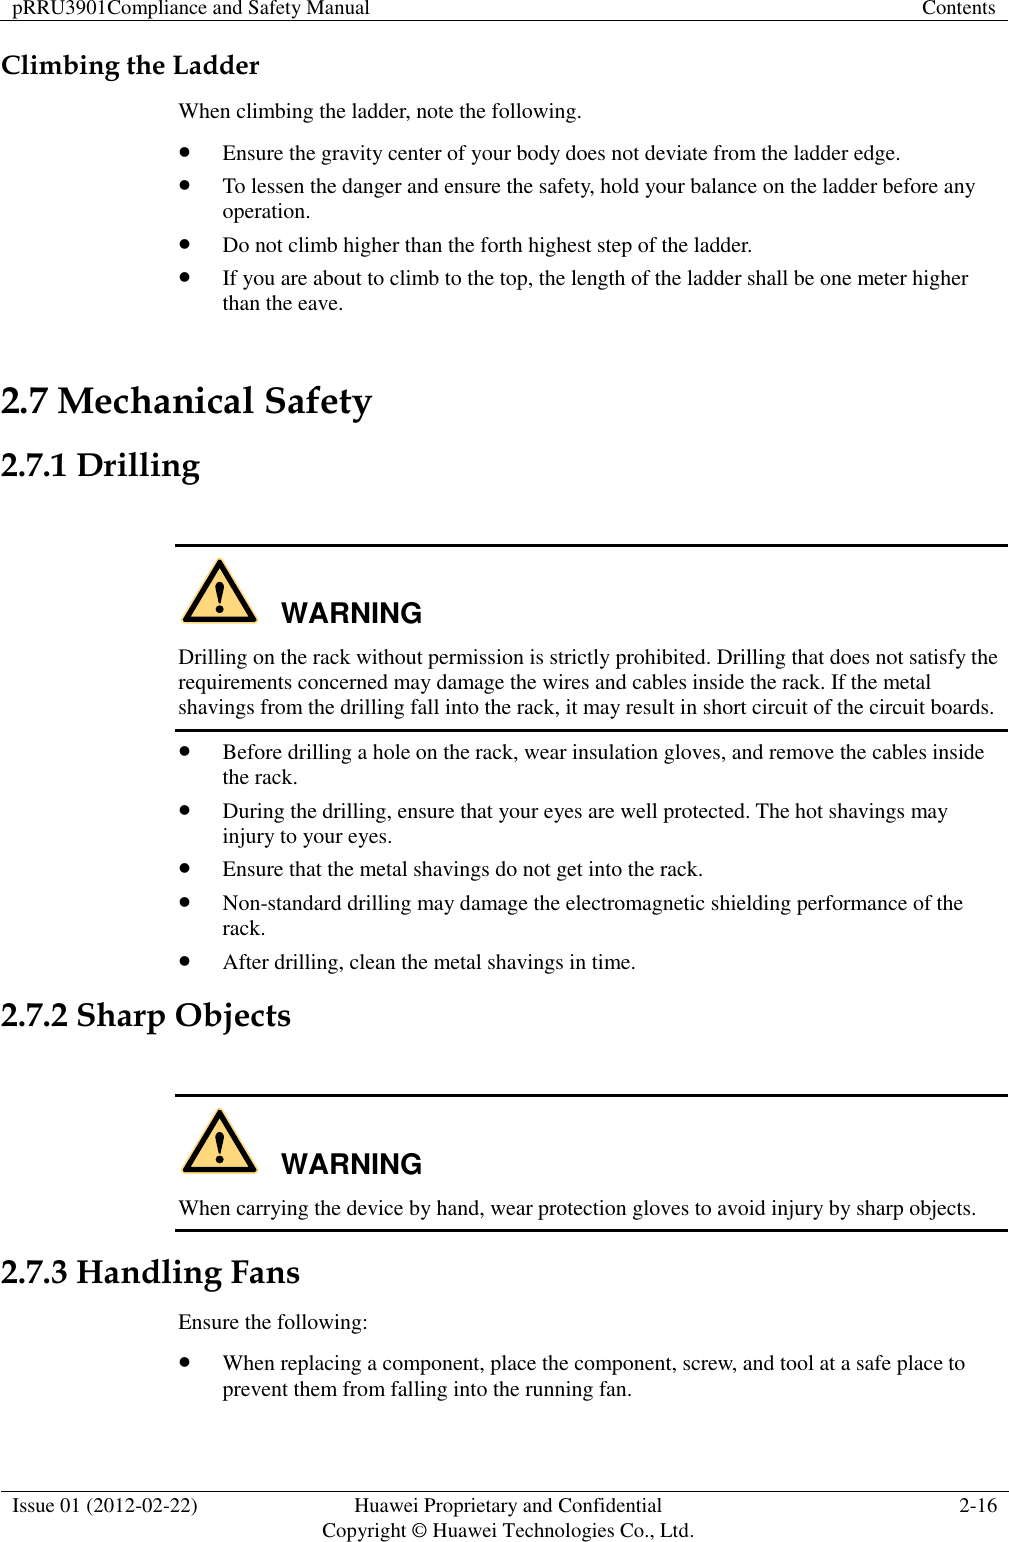 pRRU3901Compliance and Safety Manual Contents  Issue 01 (2012-02-22) Huawei Proprietary and Confidential           Copyright © Huawei Technologies Co., Ltd. 2-16  Climbing the Ladder When climbing the ladder, note the following.  Ensure the gravity center of your body does not deviate from the ladder edge.  To lessen the danger and ensure the safety, hold your balance on the ladder before any operation.  Do not climb higher than the forth highest step of the ladder.  If you are about to climb to the top, the length of the ladder shall be one meter higher than the eave. 2.7 Mechanical Safety 2.7.1 Drilling  WARNING Drilling on the rack without permission is strictly prohibited. Drilling that does not satisfy the requirements concerned may damage the wires and cables inside the rack. If the metal shavings from the drilling fall into the rack, it may result in short circuit of the circuit boards.  Before drilling a hole on the rack, wear insulation gloves, and remove the cables inside the rack.  During the drilling, ensure that your eyes are well protected. The hot shavings may injury to your eyes.  Ensure that the metal shavings do not get into the rack.  Non-standard drilling may damage the electromagnetic shielding performance of the rack.  After drilling, clean the metal shavings in time. 2.7.2 Sharp Objects  WARNING When carrying the device by hand, wear protection gloves to avoid injury by sharp objects. 2.7.3 Handling Fans Ensure the following:  When replacing a component, place the component, screw, and tool at a safe place to prevent them from falling into the running fan. 